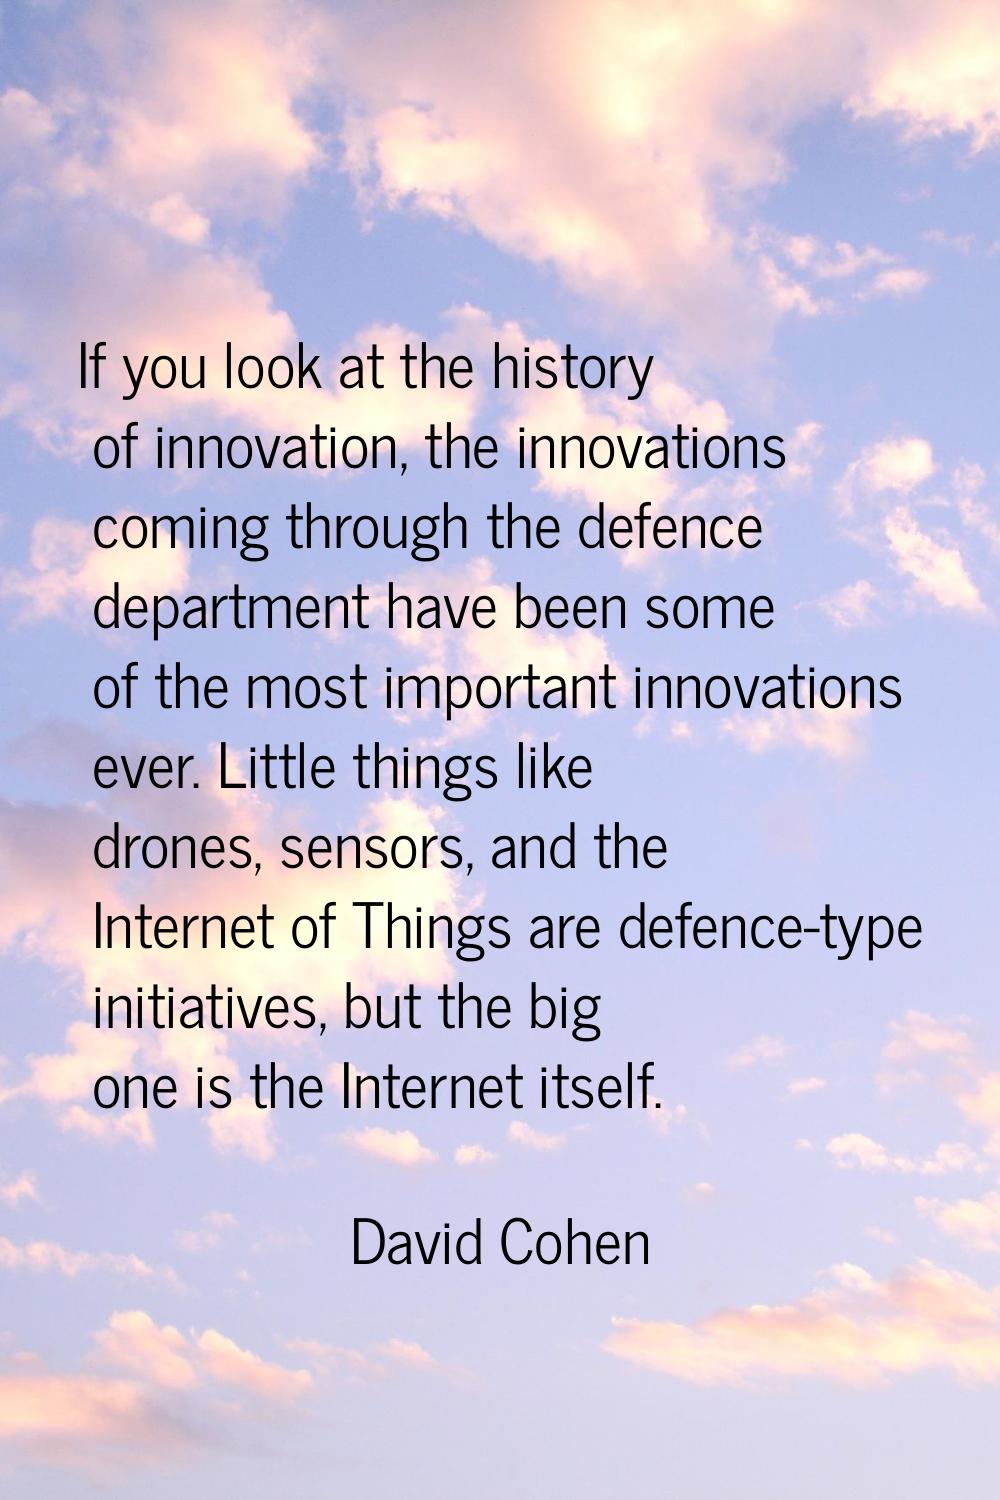 If you look at the history of innovation, the innovations coming through the defence department hav